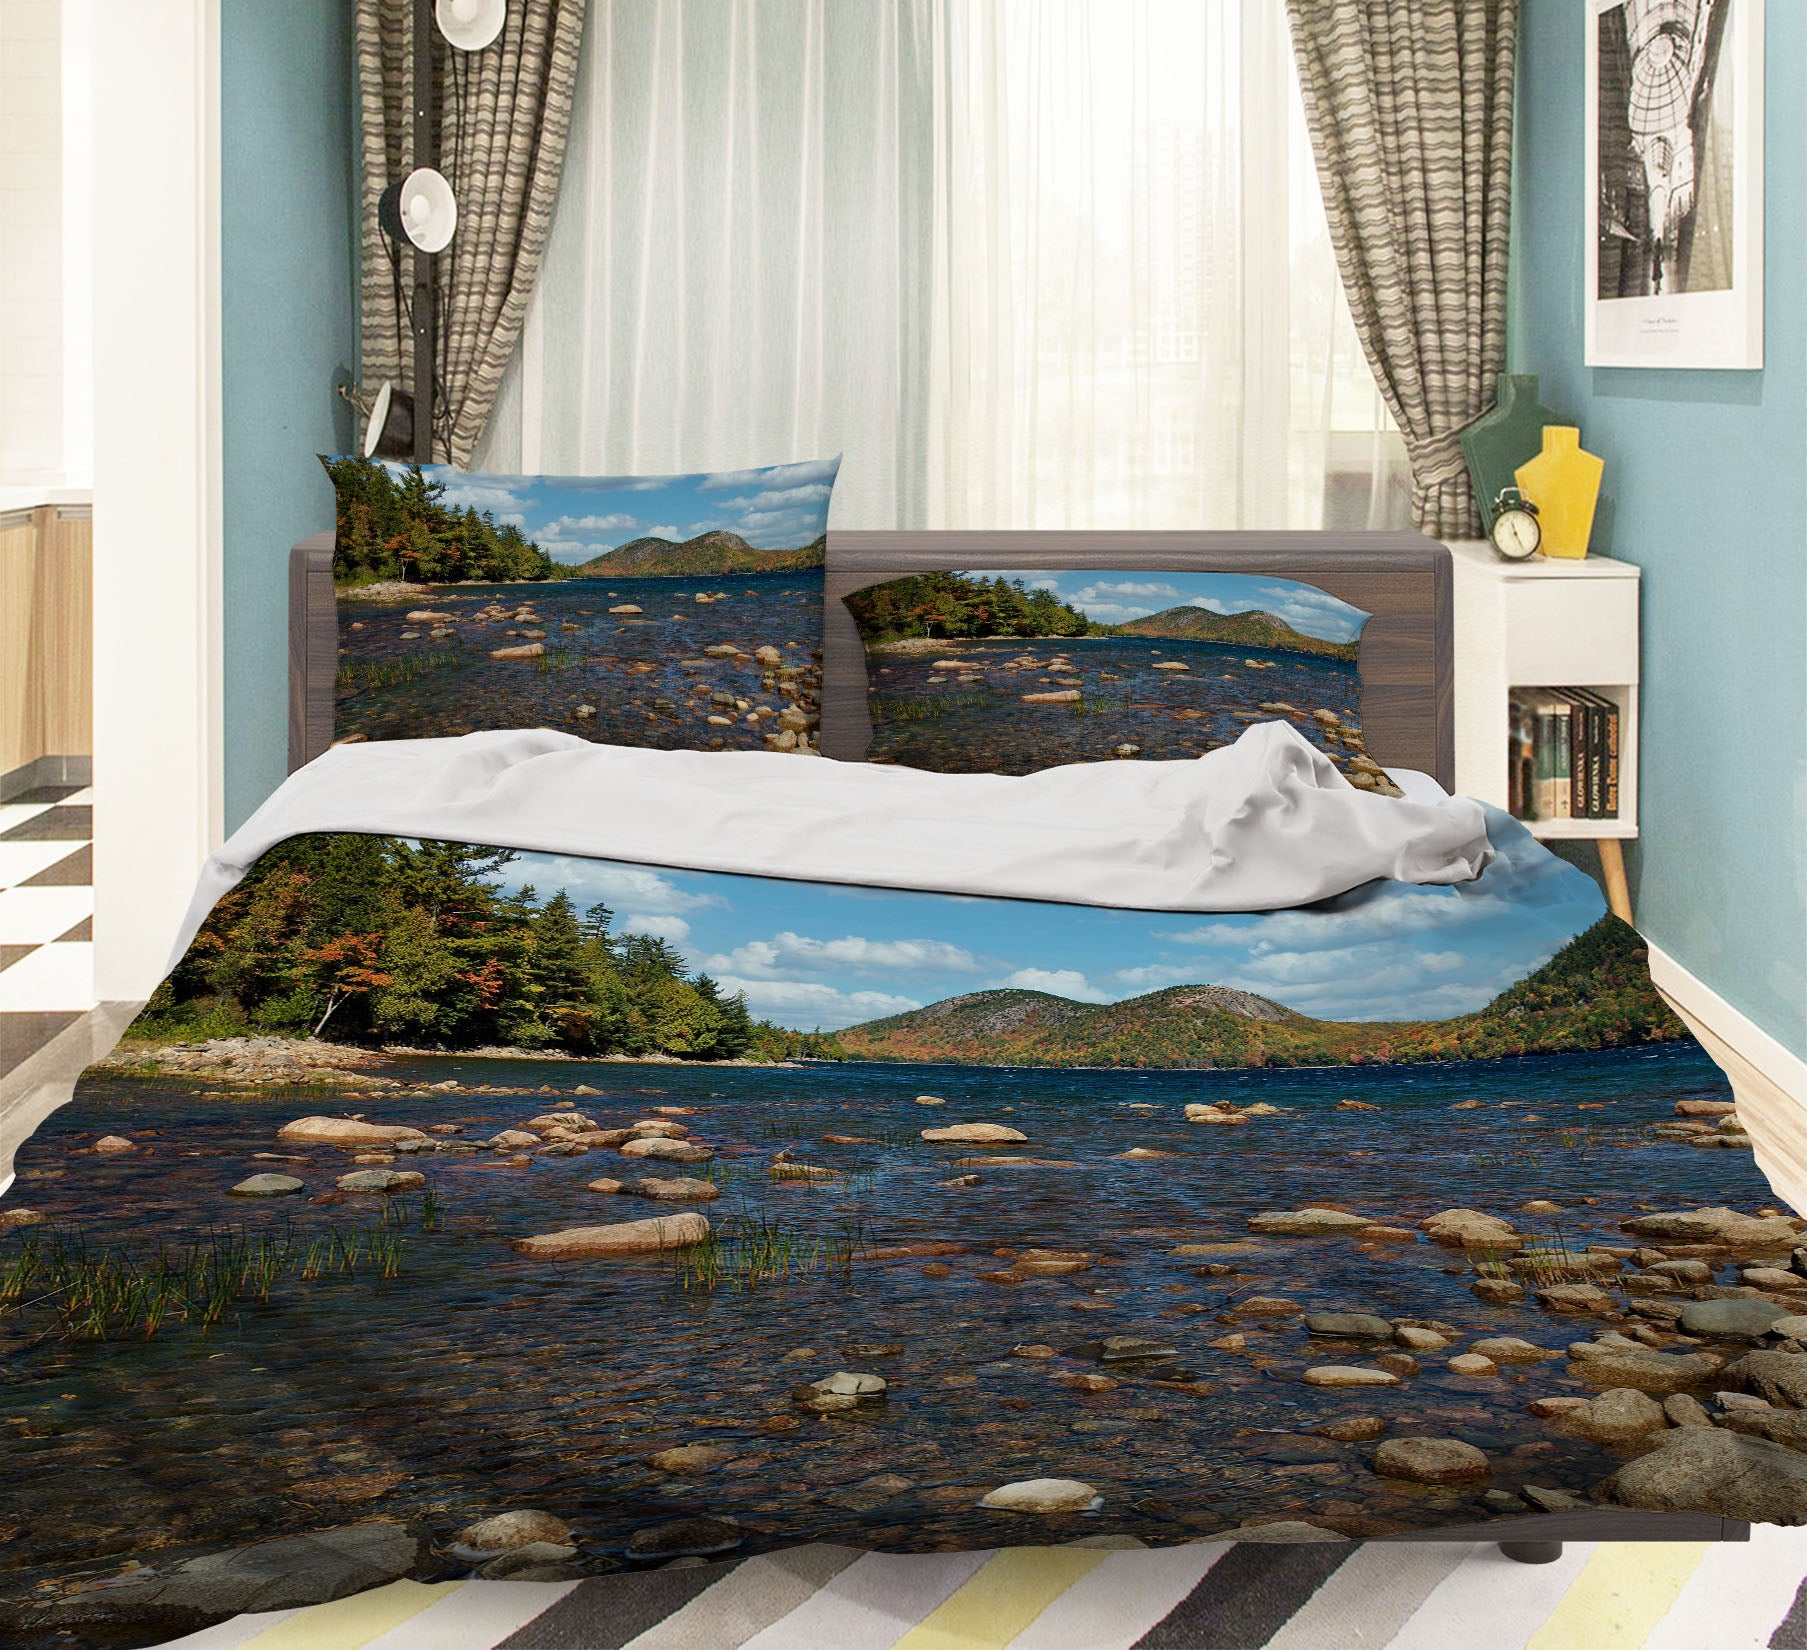 3D River Water Stones 62182 Kathy Barefield Bedding Bed Pillowcases Quilt